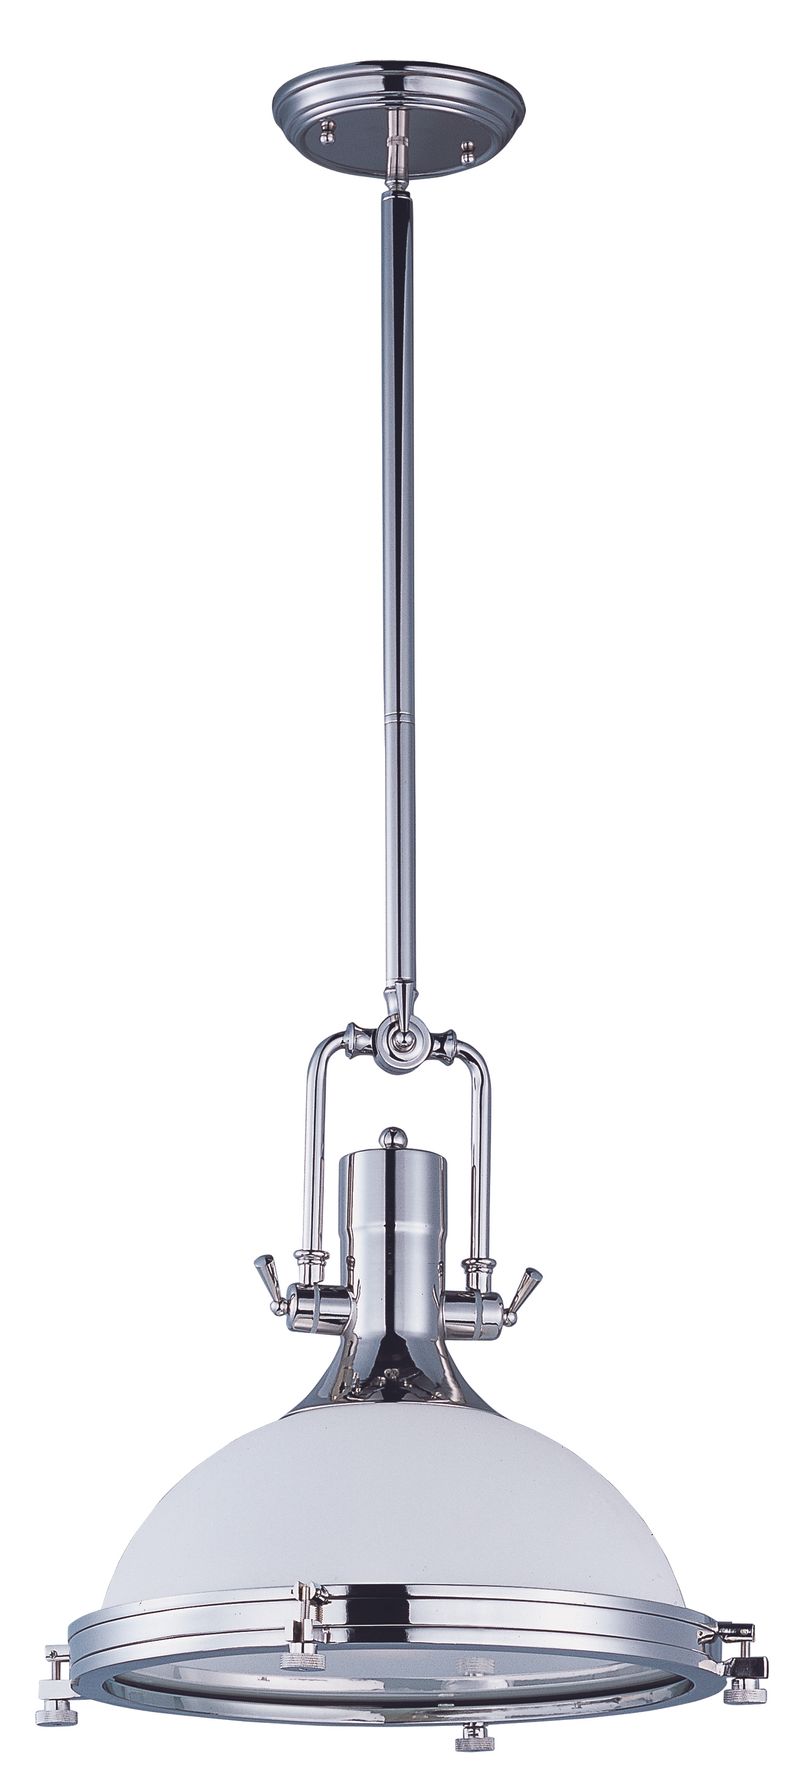 Hi-Bay 17.75' Single Light Pendant in Polished Nickel with White Glass Finish